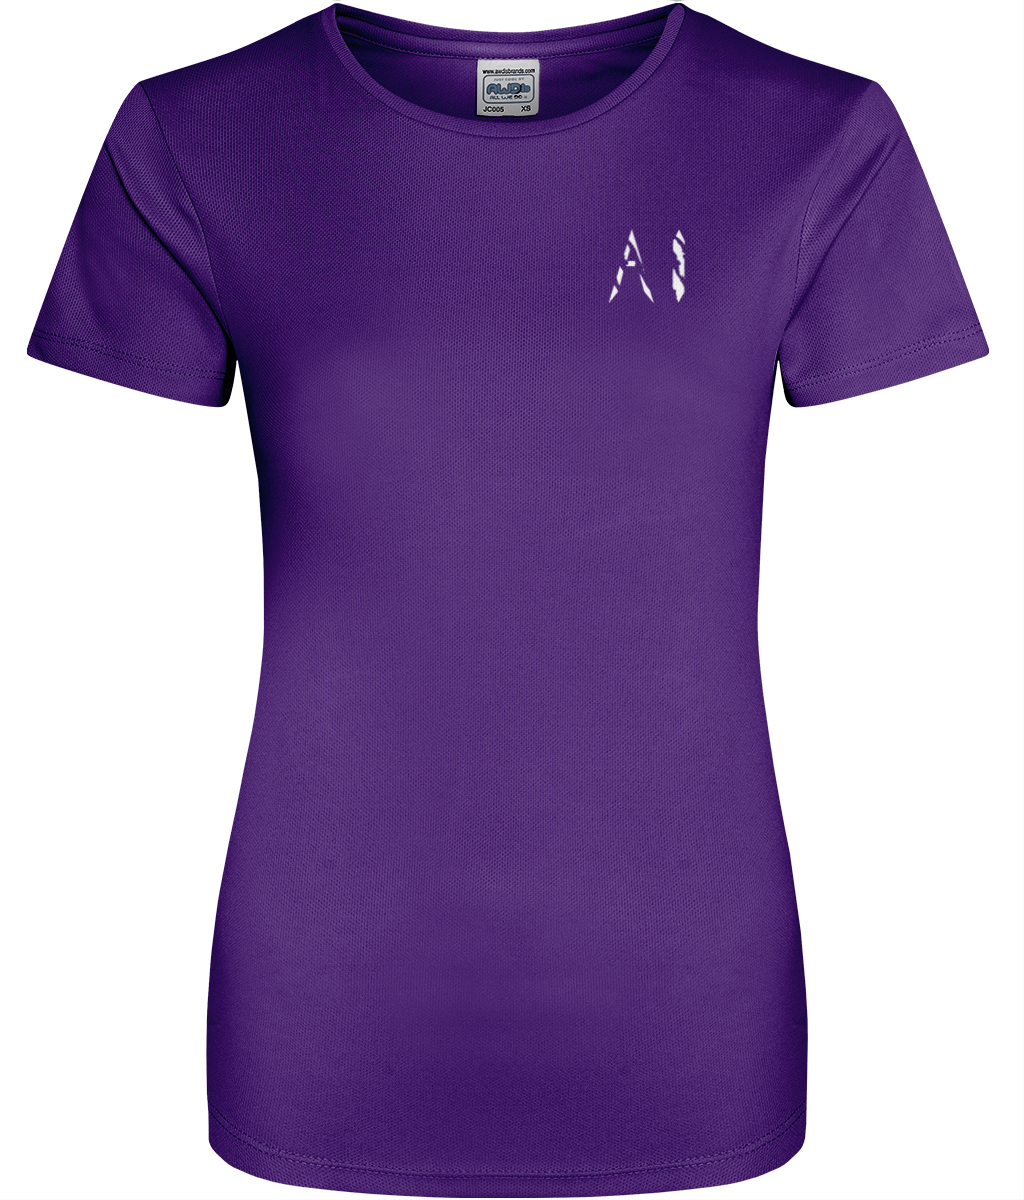 Womens purple Athletic Sports Shirt with White AI logo on left breast